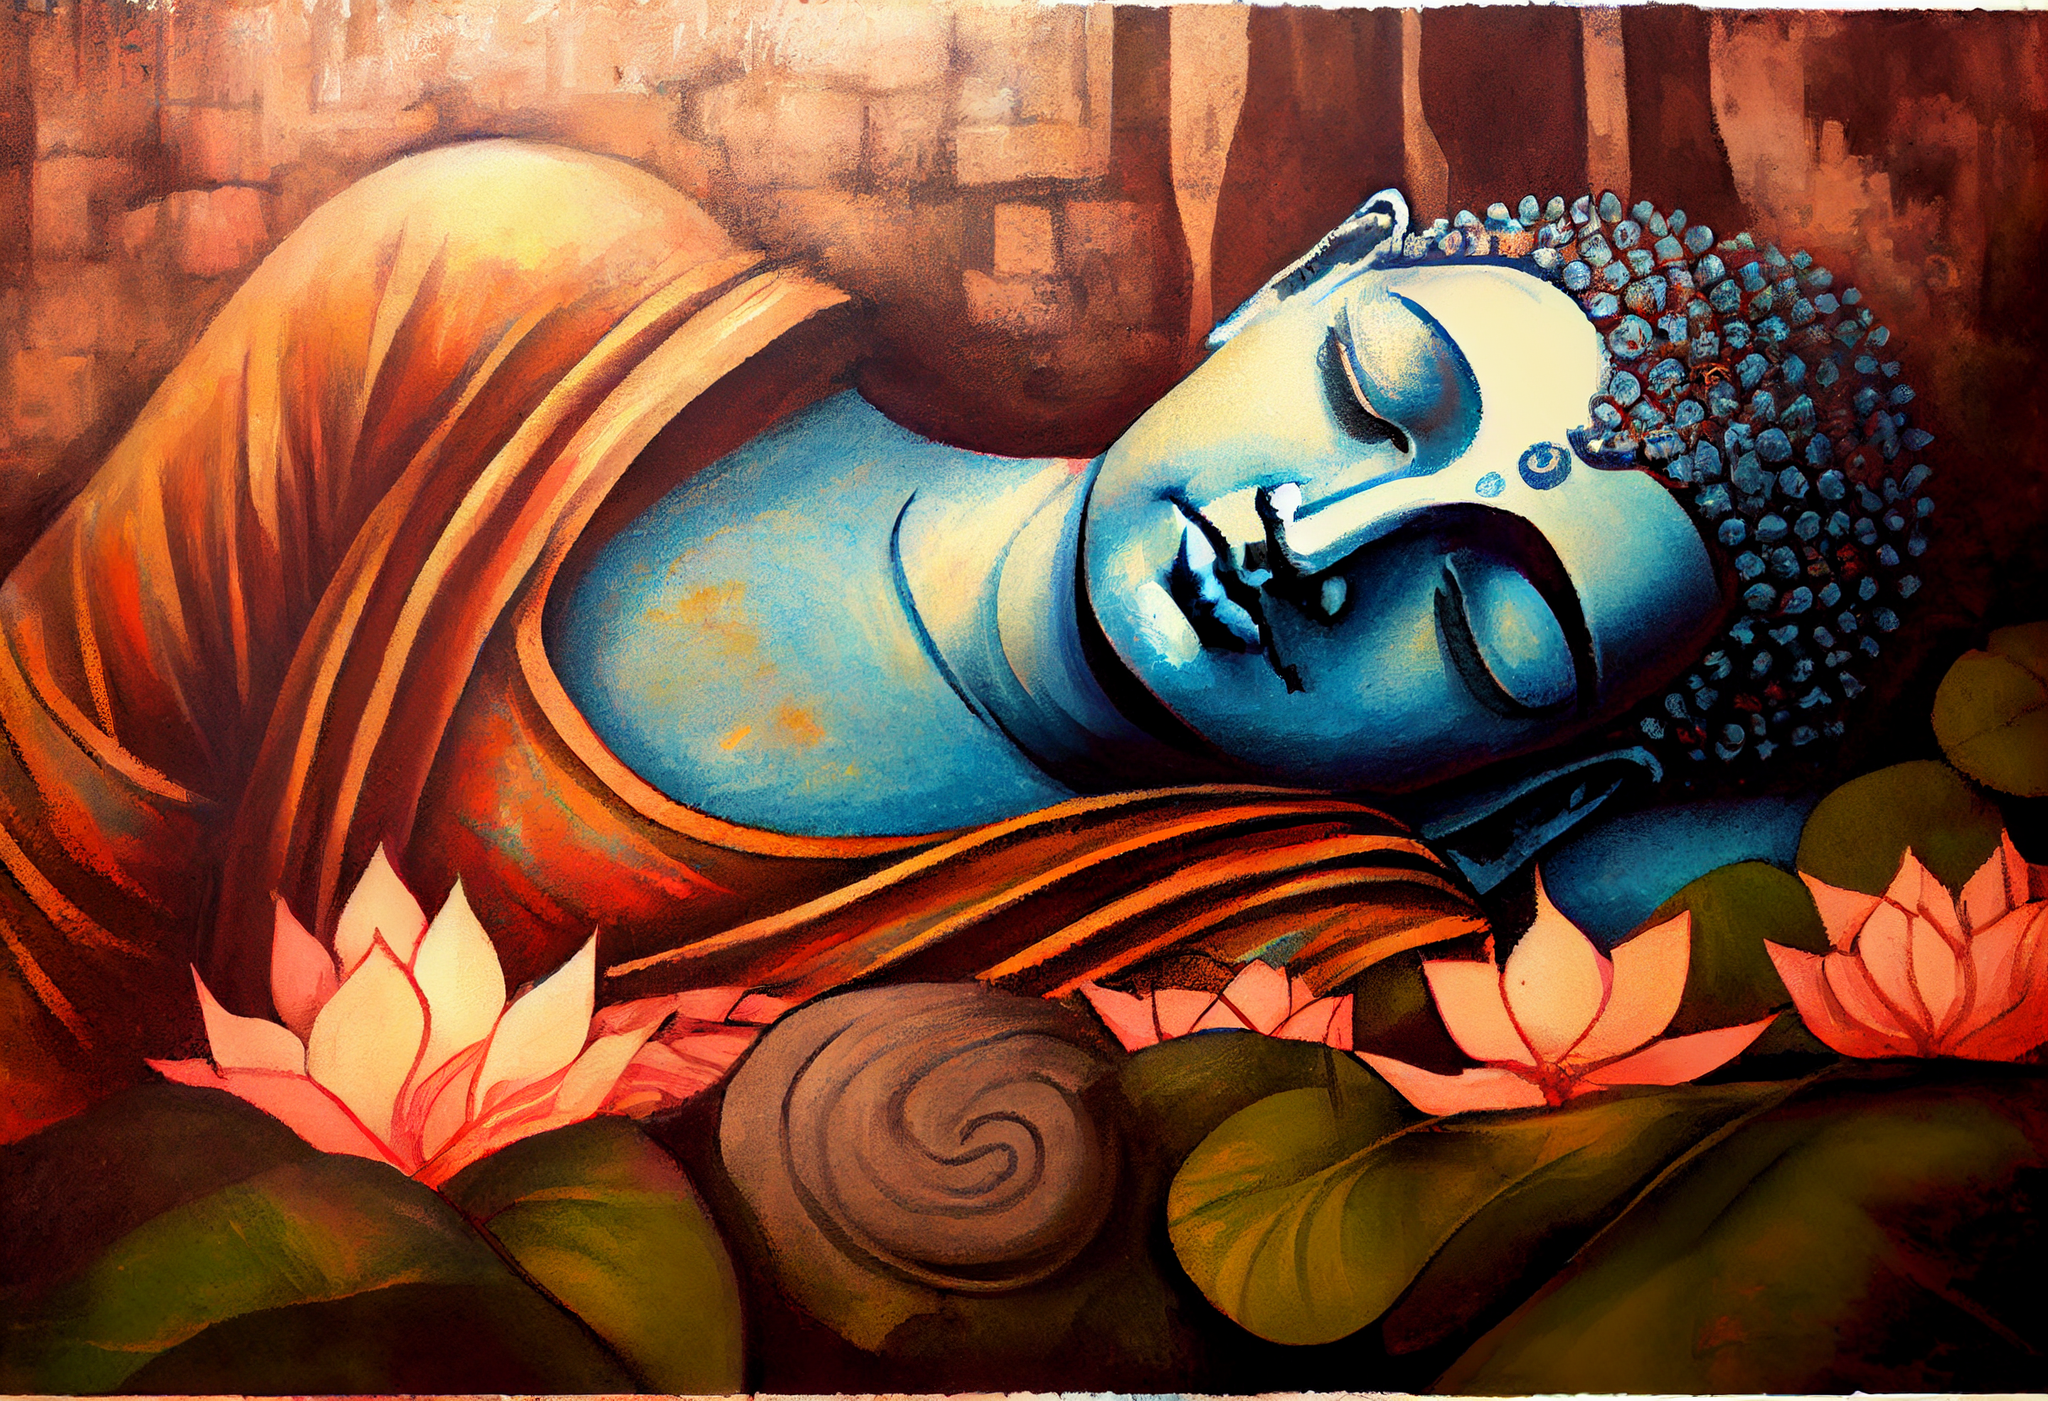 Divine Serenity: A Colorful Oil Print of Lord Buddha Resting on Lotus Flowers